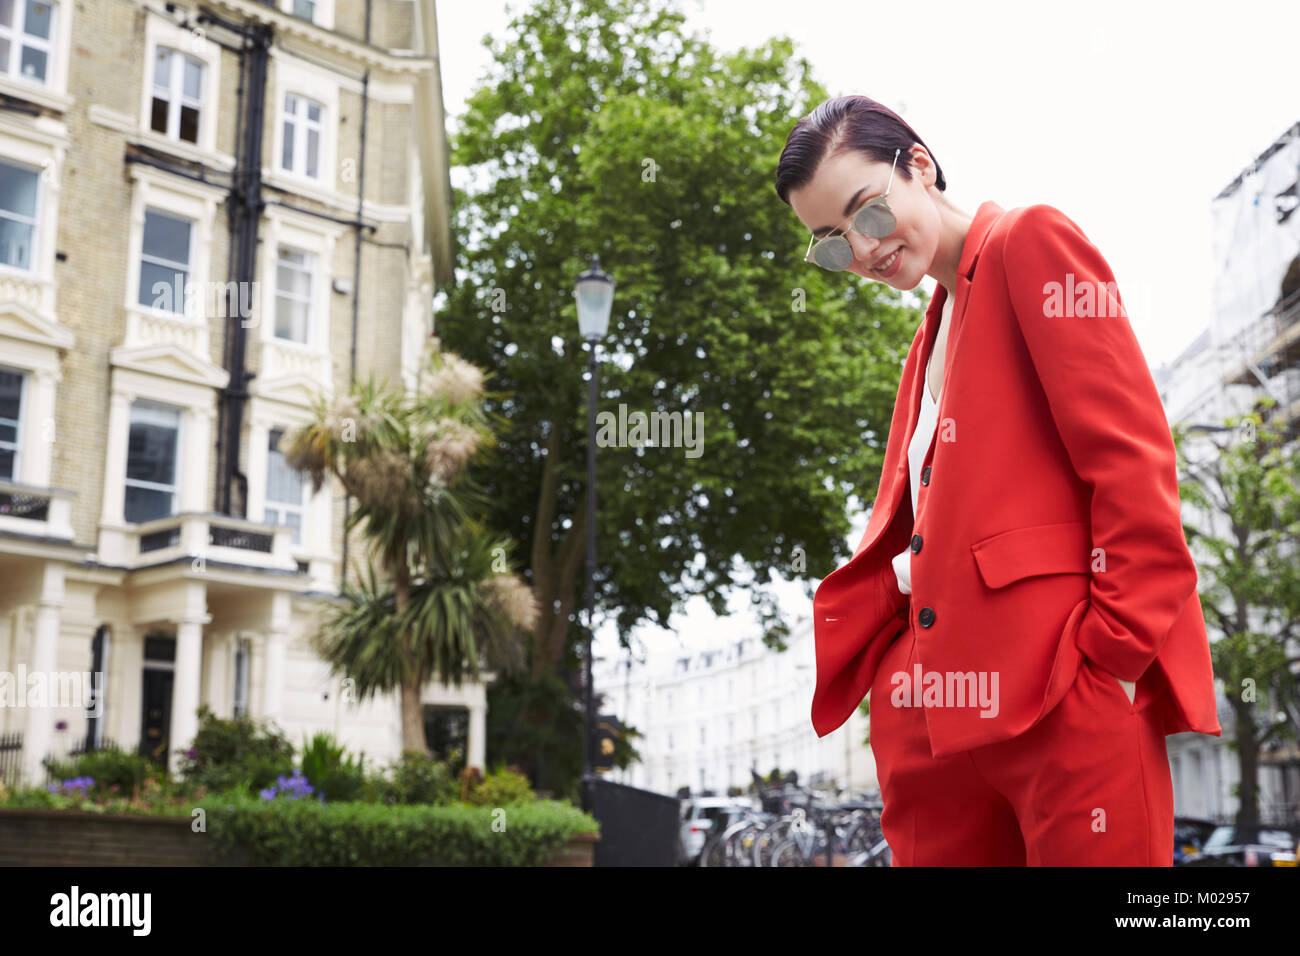 Chic woman in red suit in Notting Hill street, horizontal Stock Photo